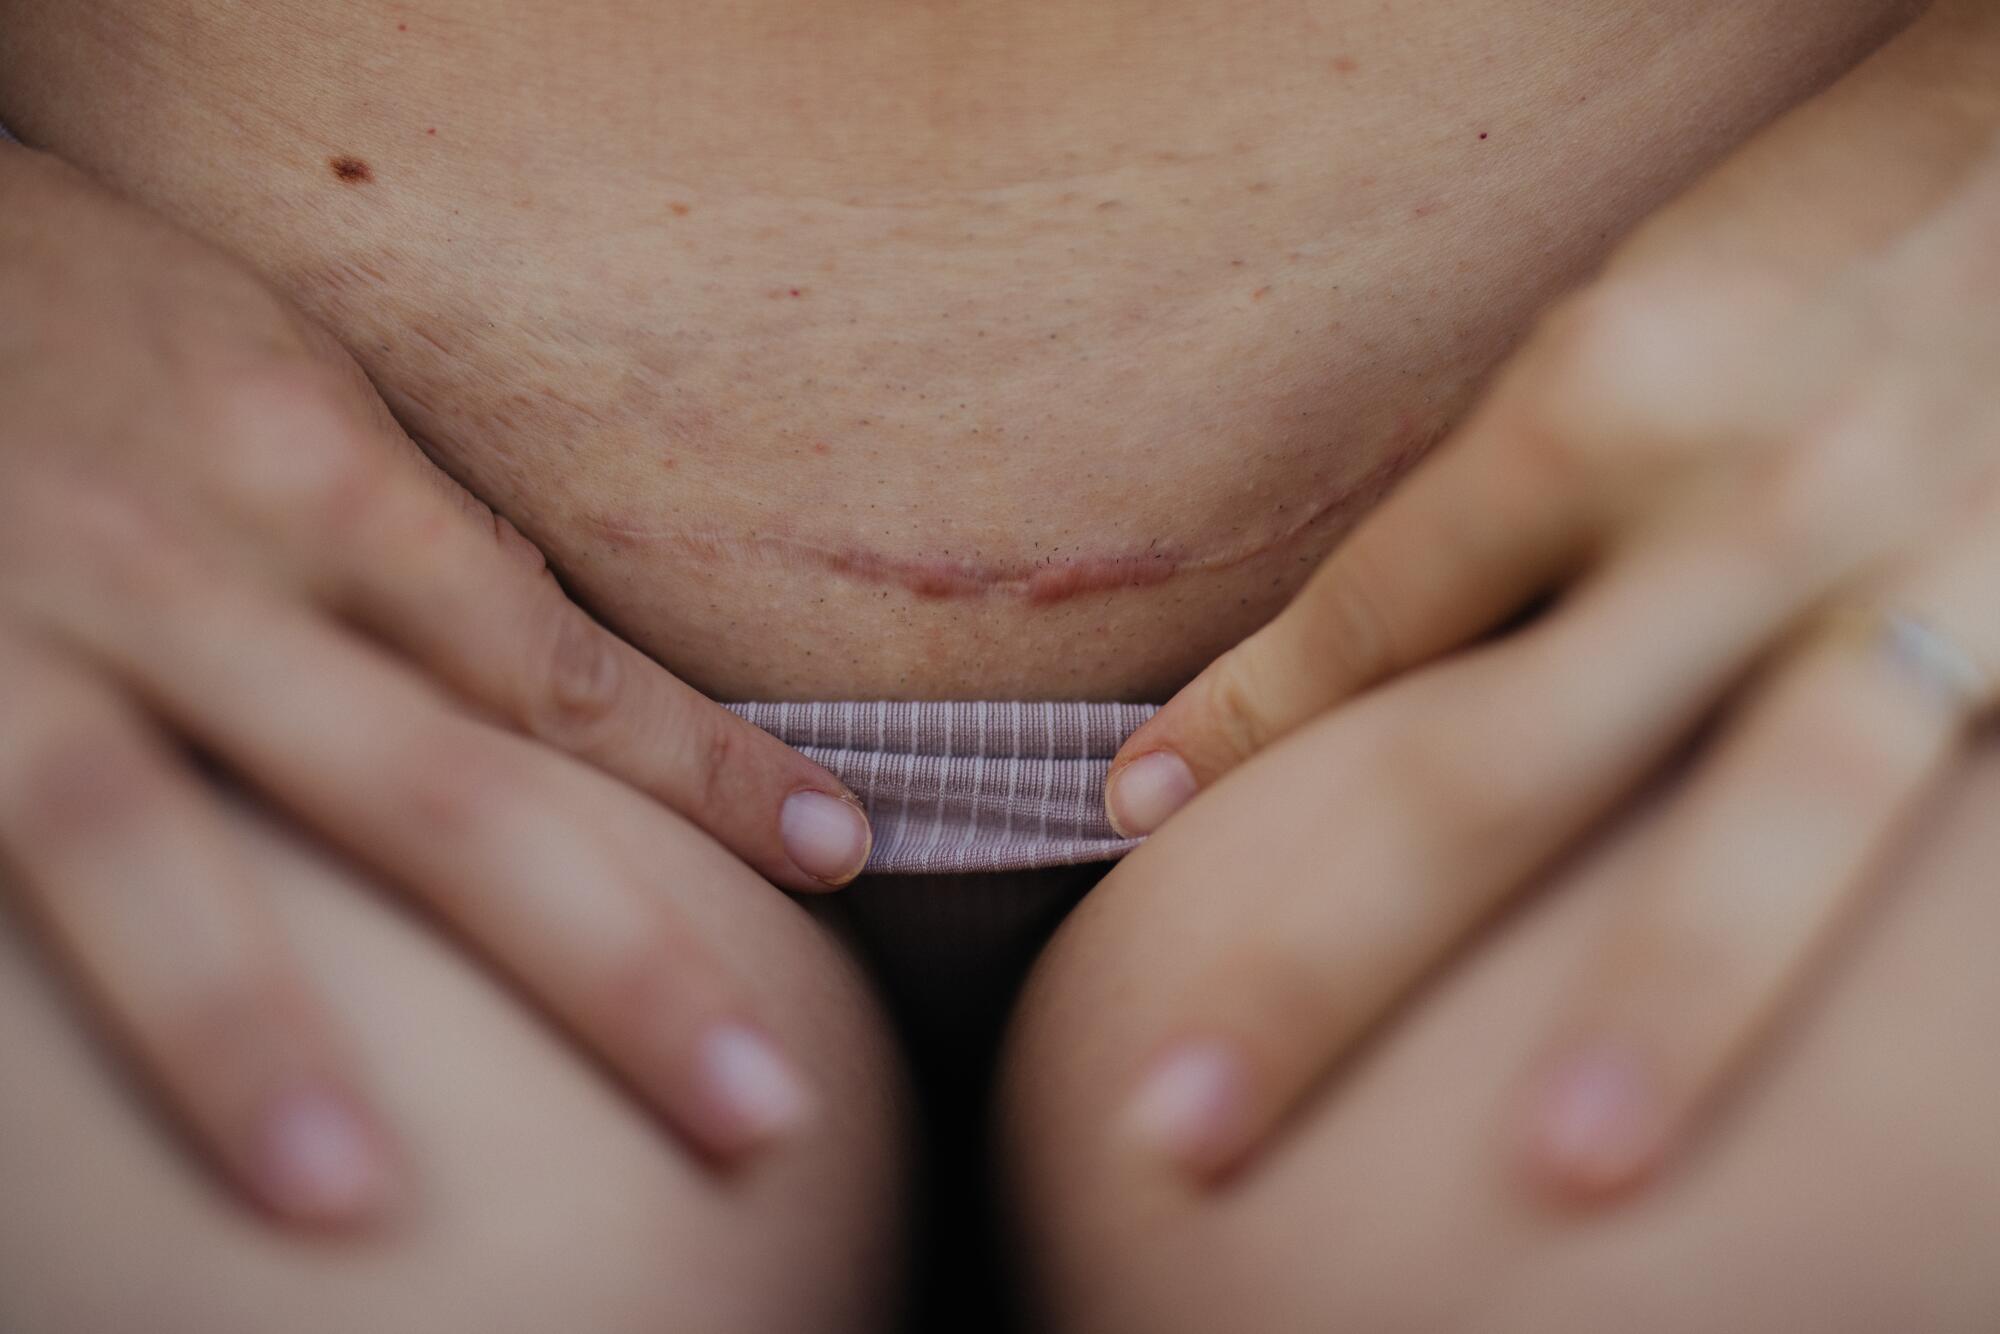 A woman lowers her underwear band to reveal a C-section scar